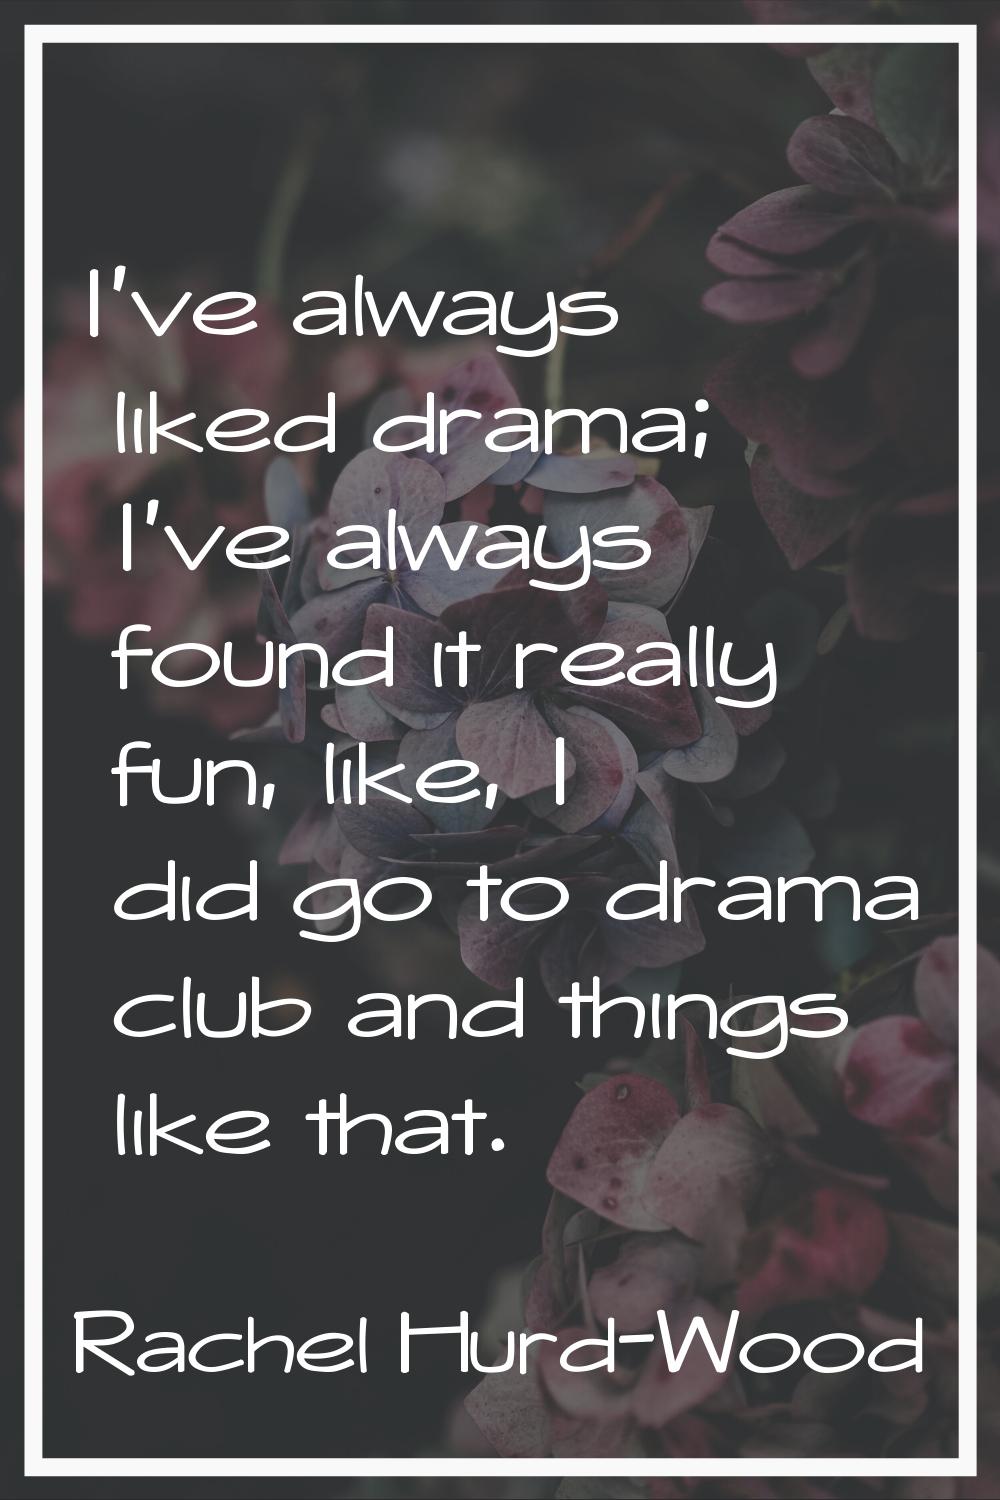 I've always liked drama; I've always found it really fun, like, I did go to drama club and things l